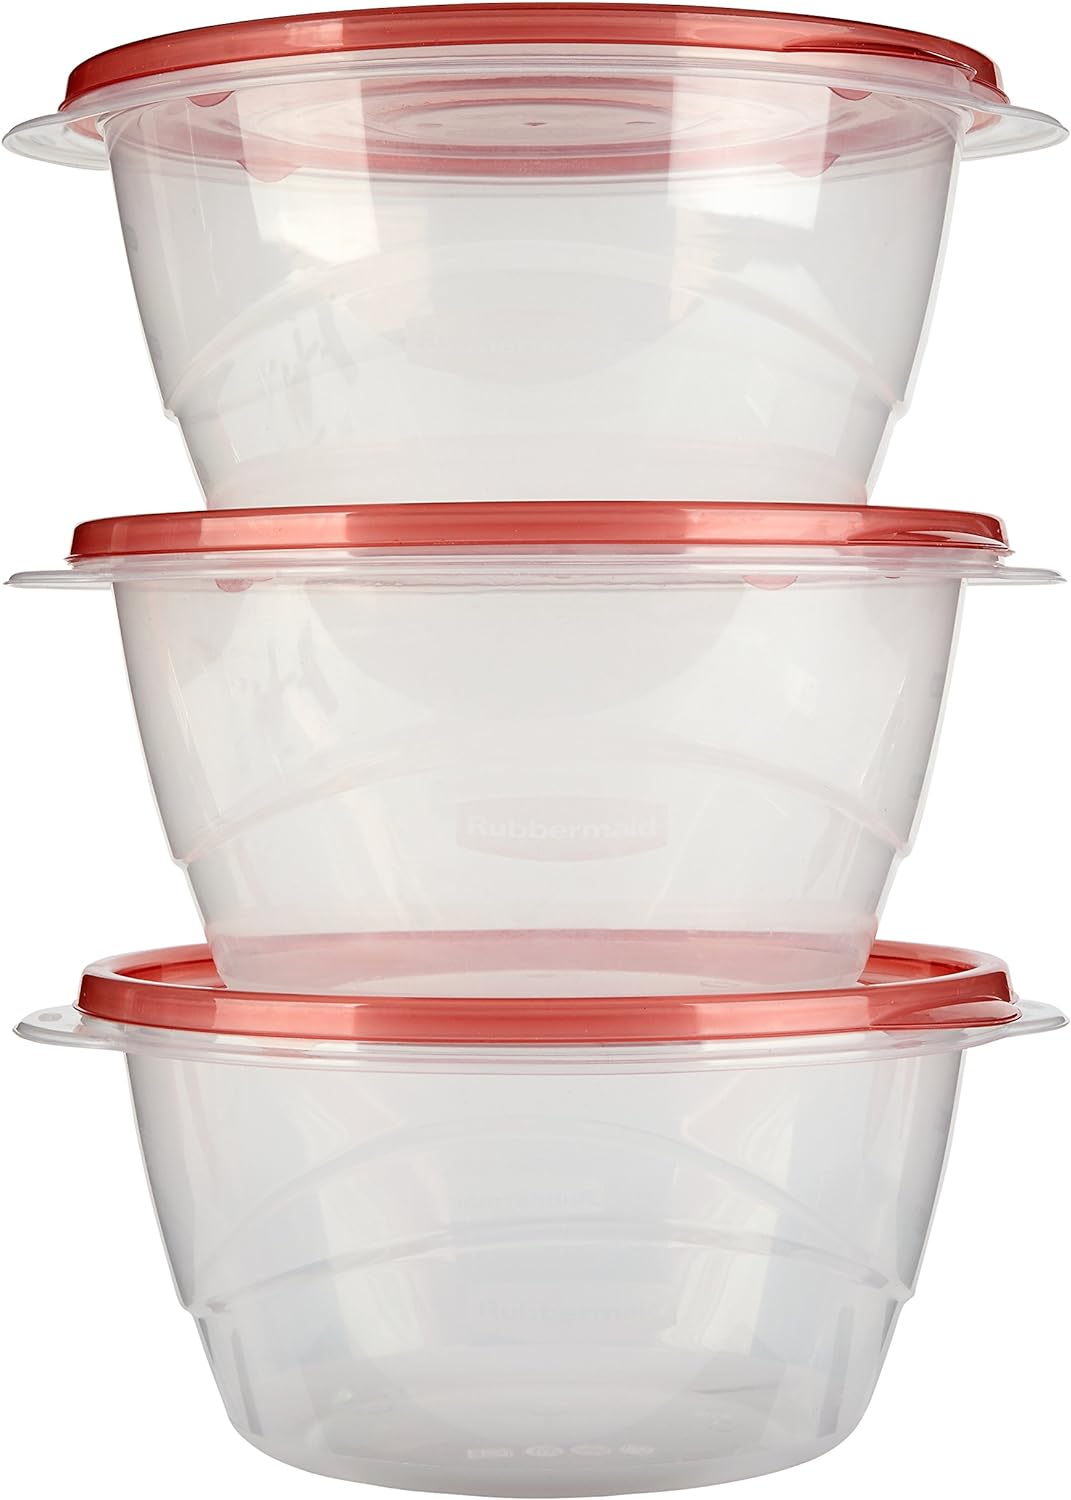 Rubbermaid TakeAlongs Food Storage Containers – 6.2 Cup – 3-Pk.